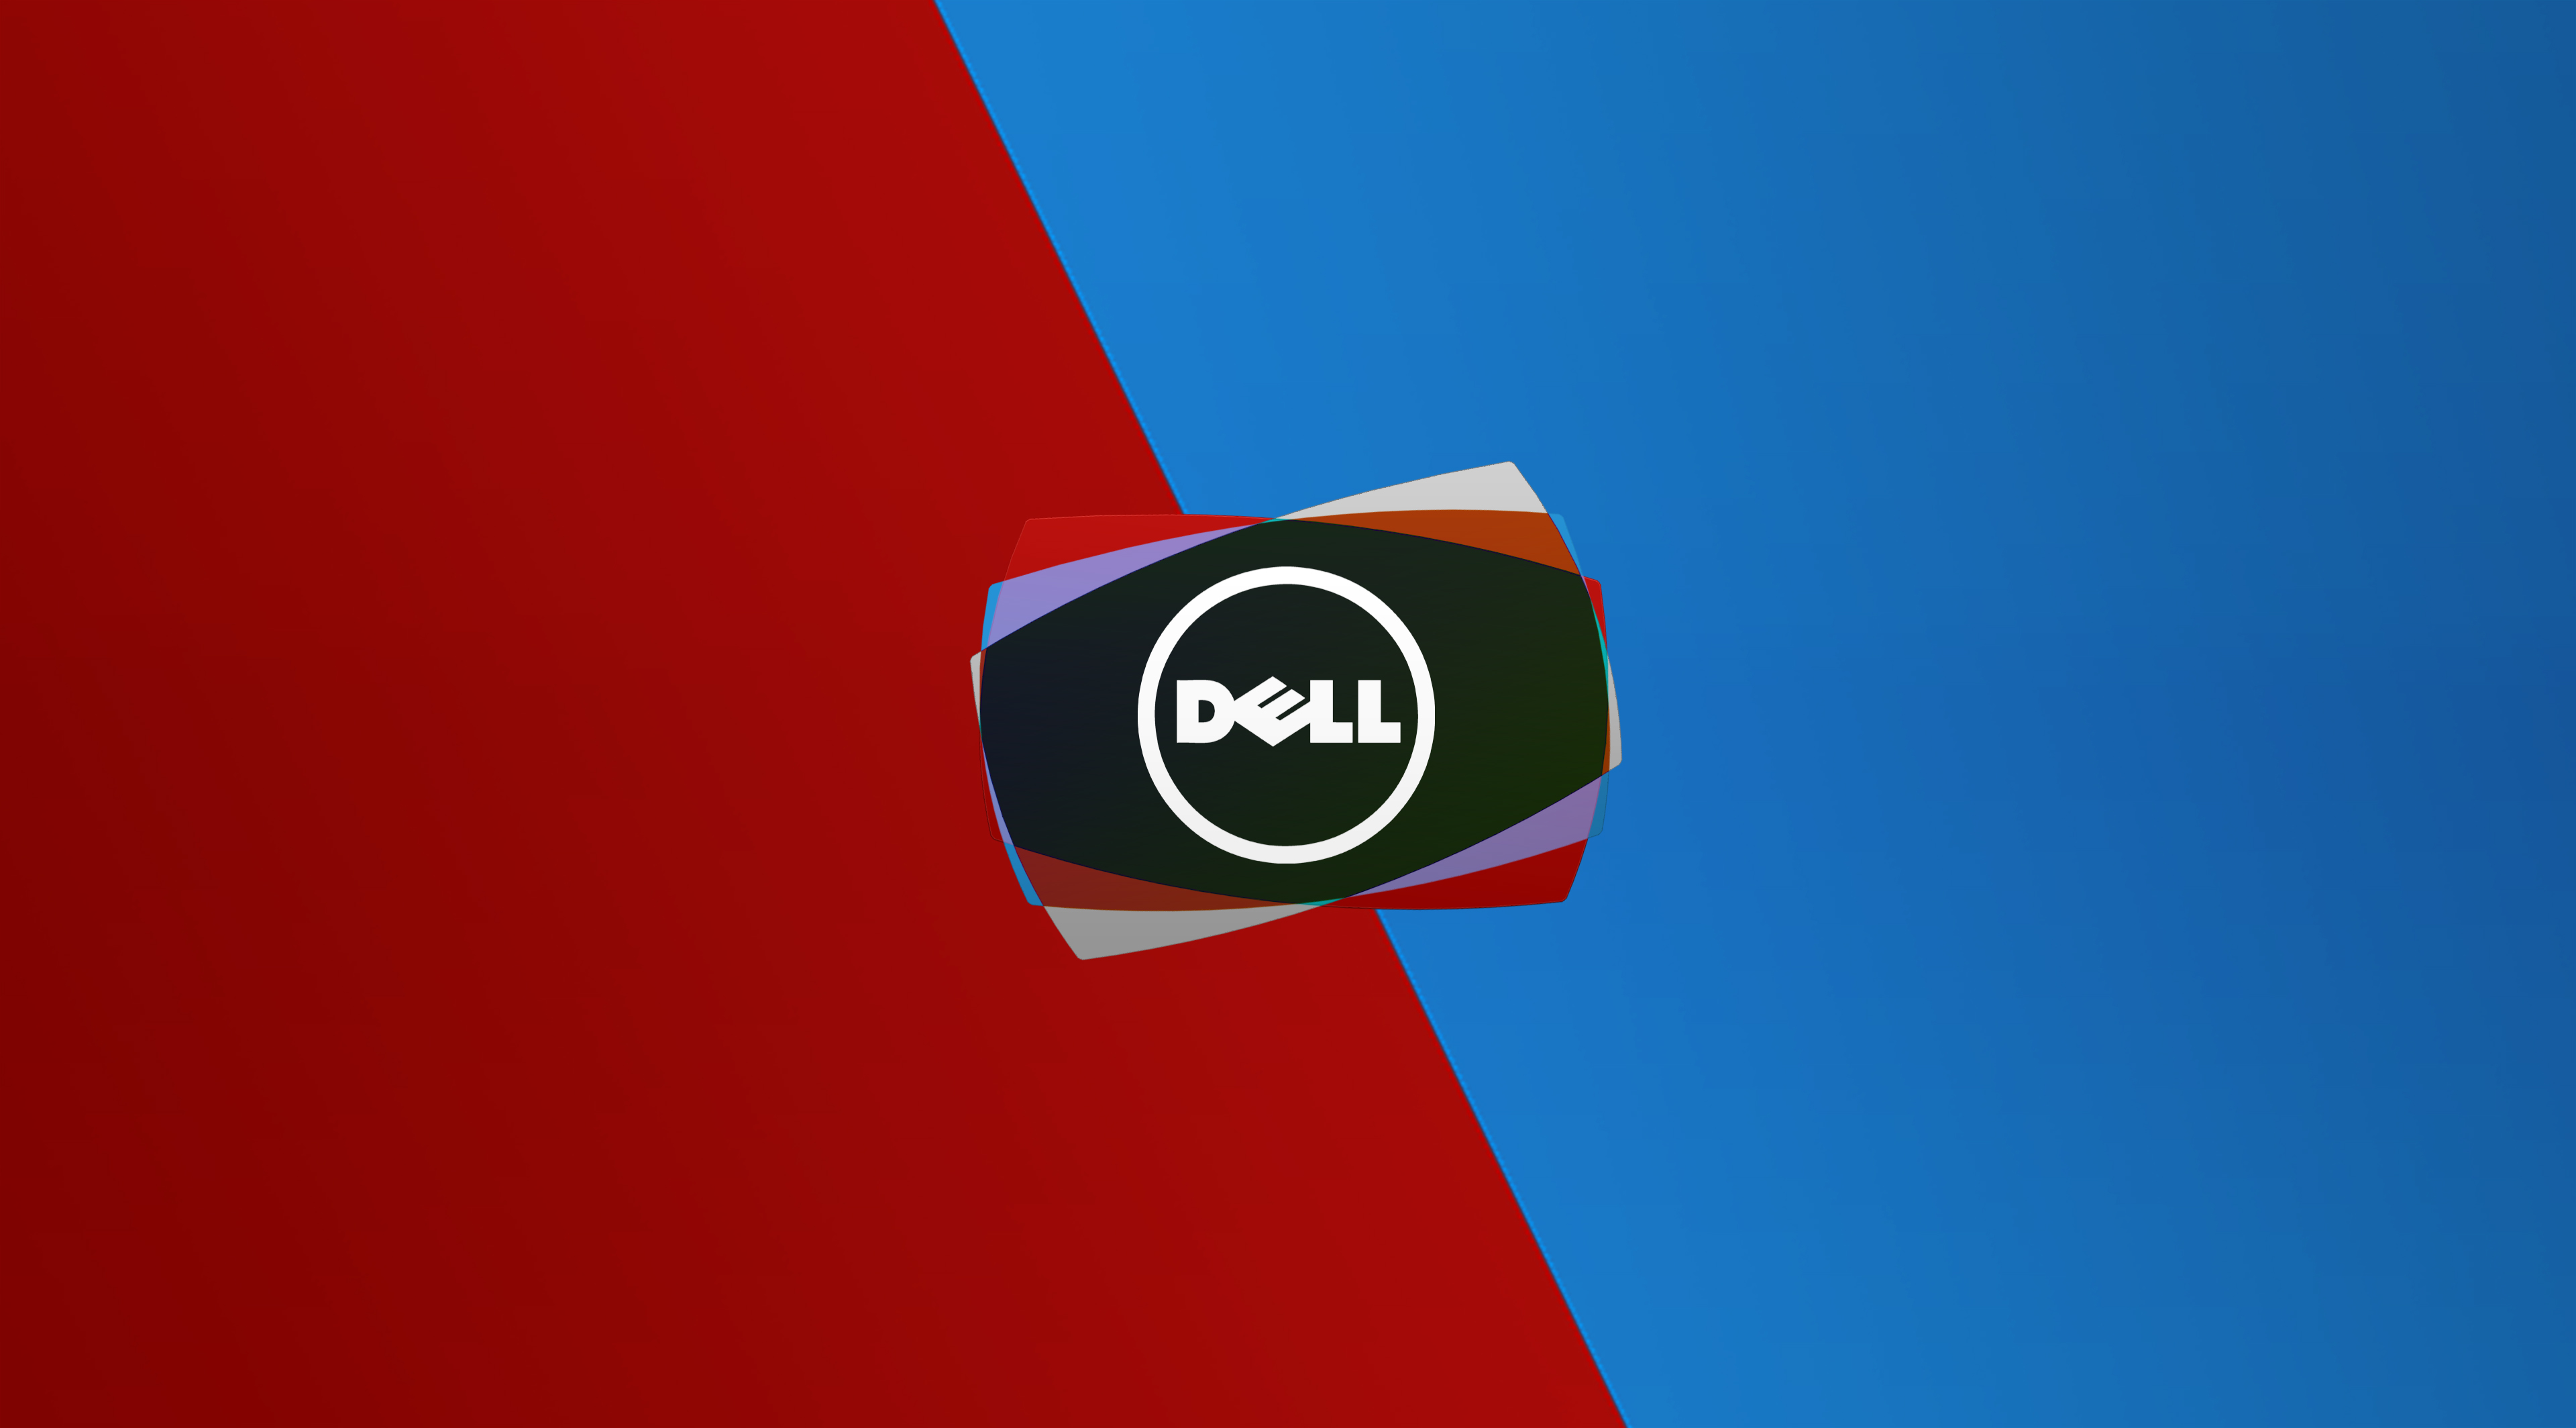 Dell Wallpapers 12 3840 X 2128